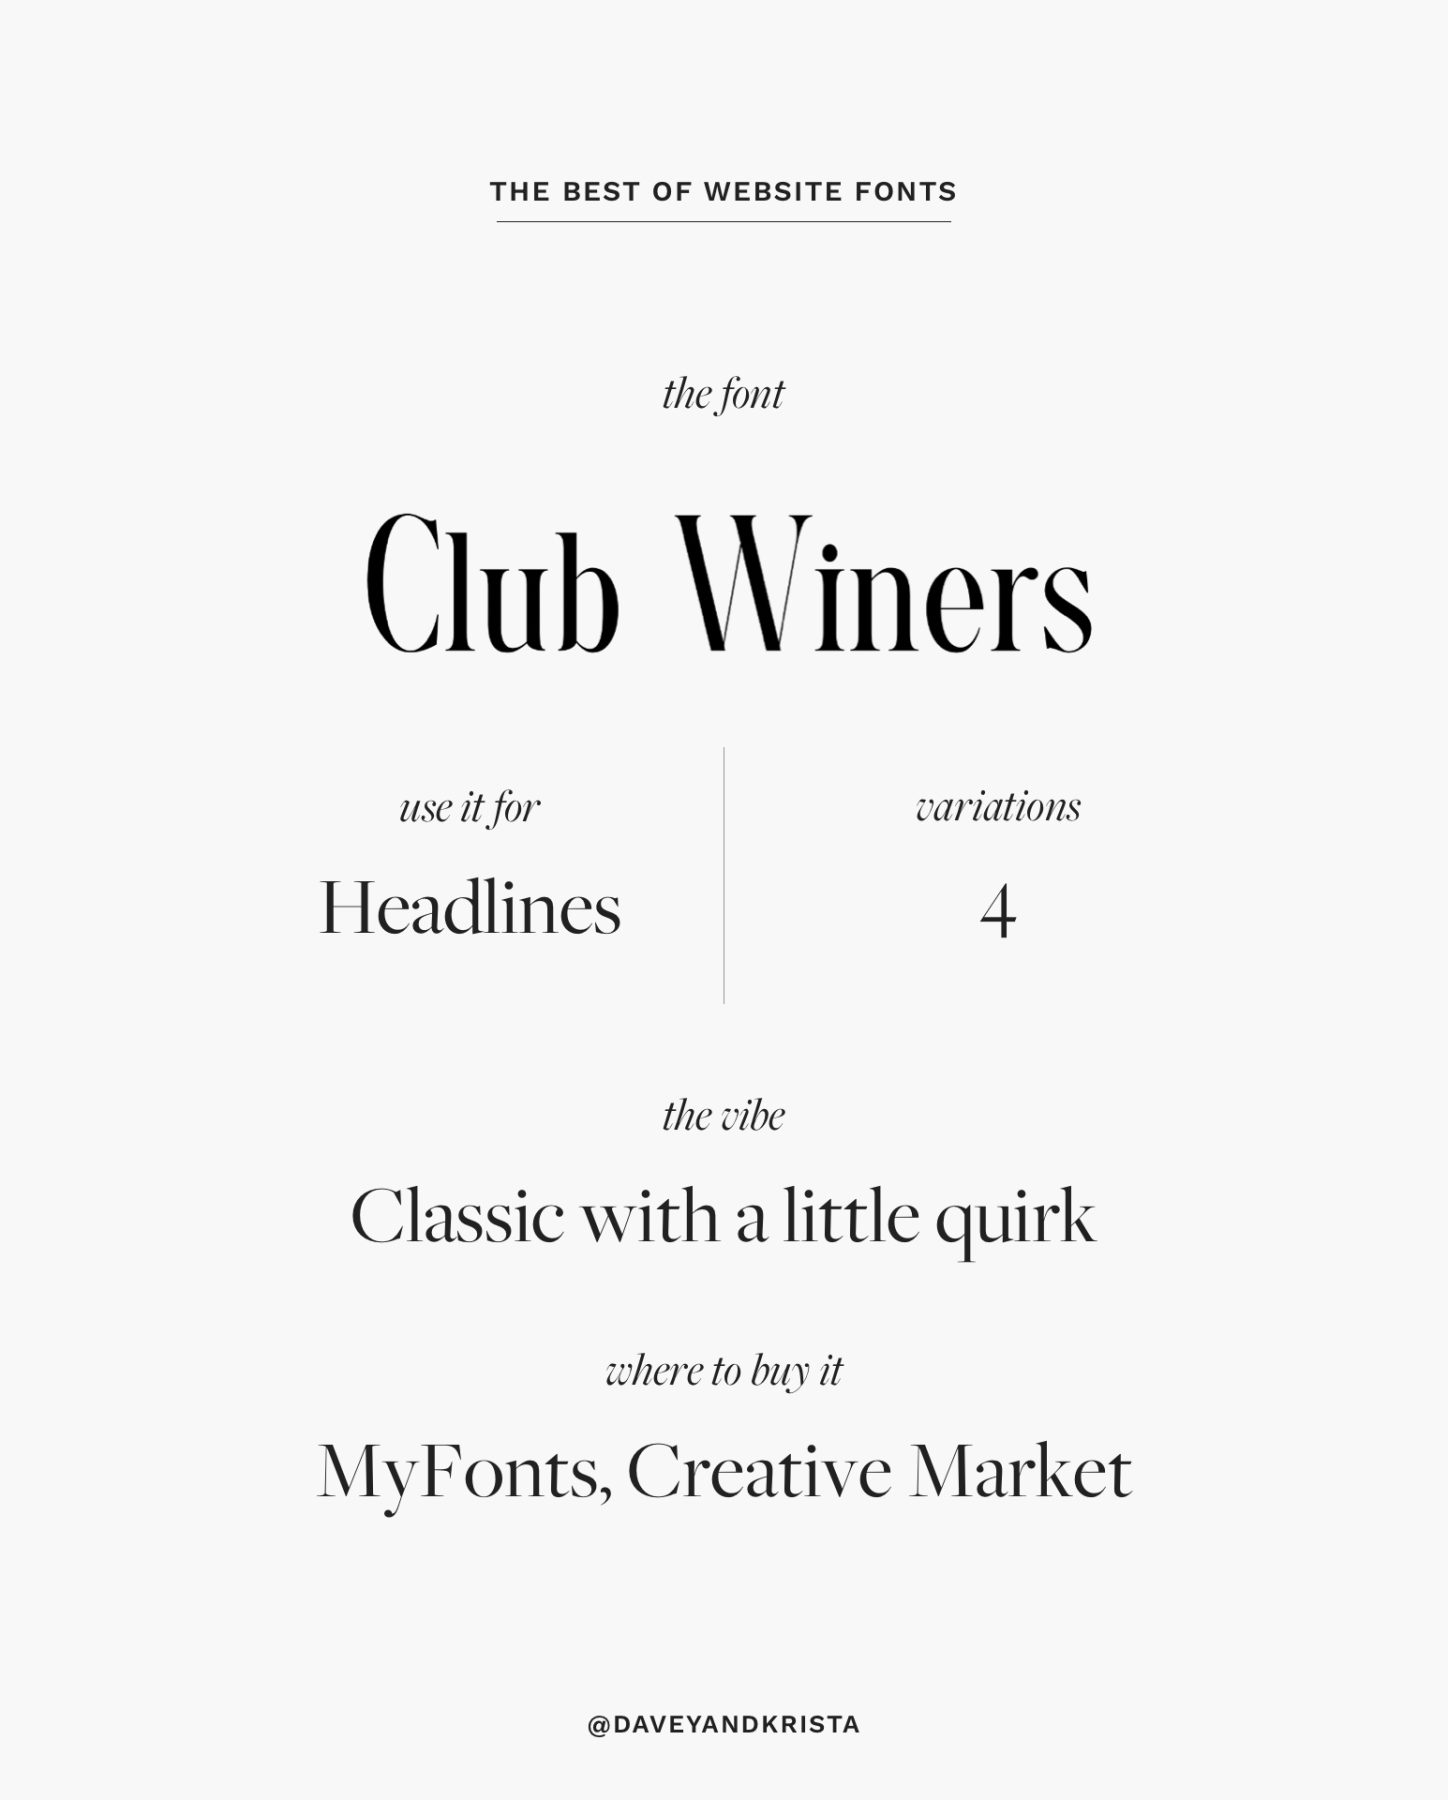 Classic yet quirky website serif font - Club Winers | The Best Fonts for Websites
